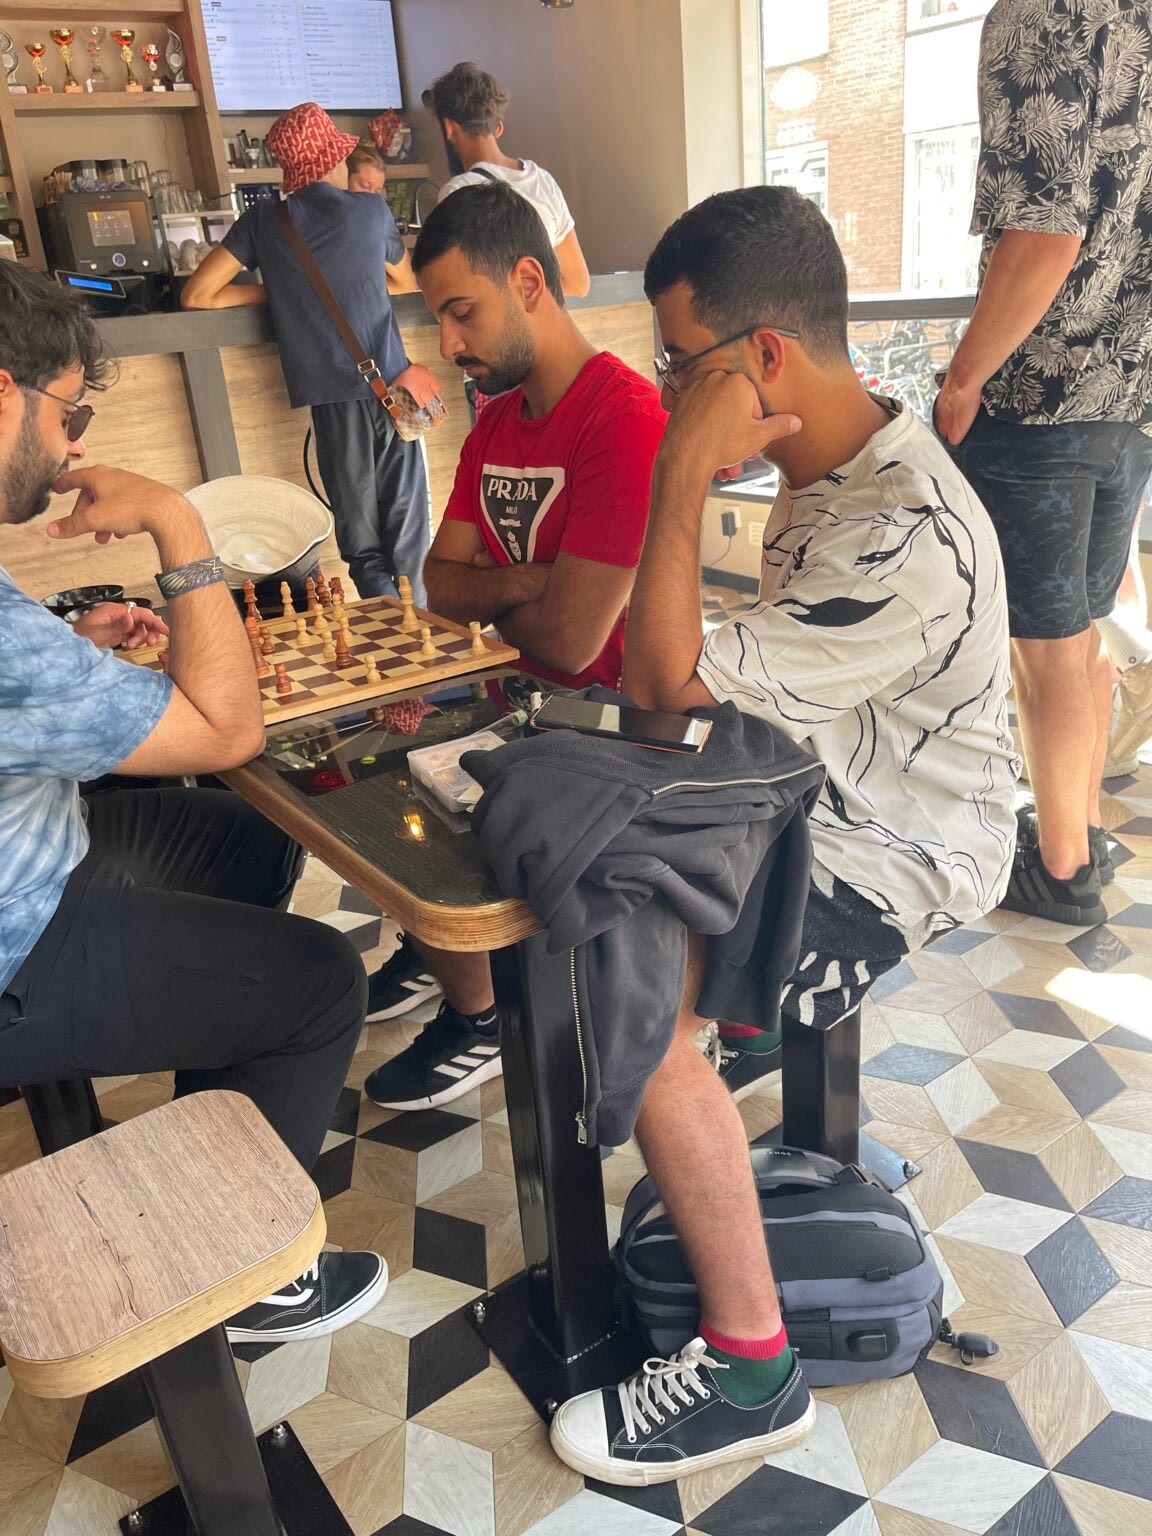 Chess match in a coffee shop in Amsterdam.